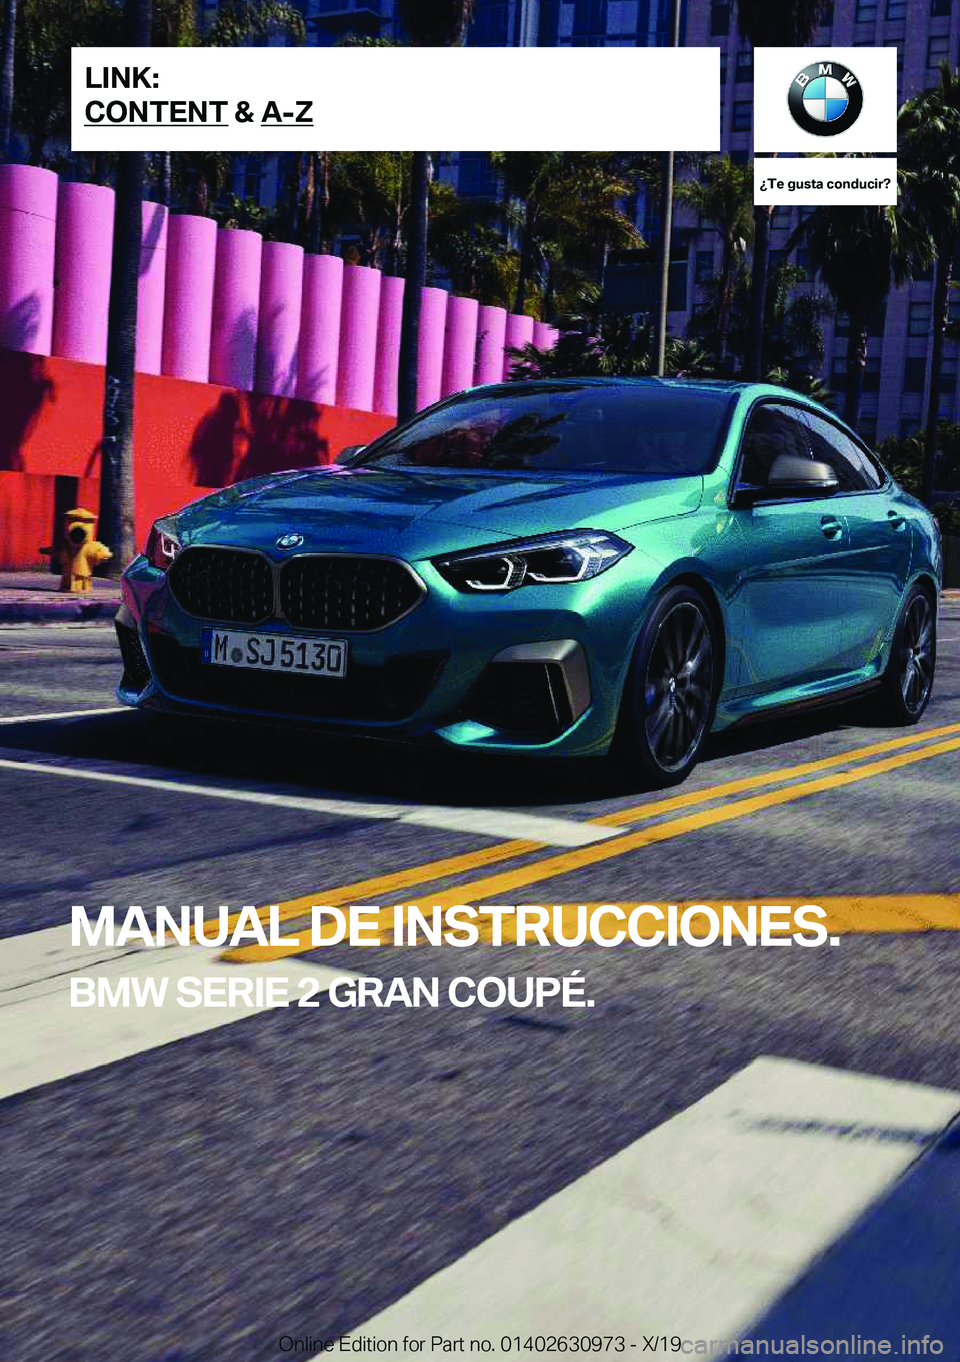 BMW 2 SERIES GRAN COUPE 2020  Manuales de Empleo (in Spanish) ��T�e��g�u�s�t�a��c�o�n�d�u�c�i�r� 
�M�A�N�U�A�L��D�E��I�N�S�T�R�U�C�C�I�O�N�E�S�.
�B�M�W��S�E�R�I�E��2��G�R�A�N��C�O�U�P�